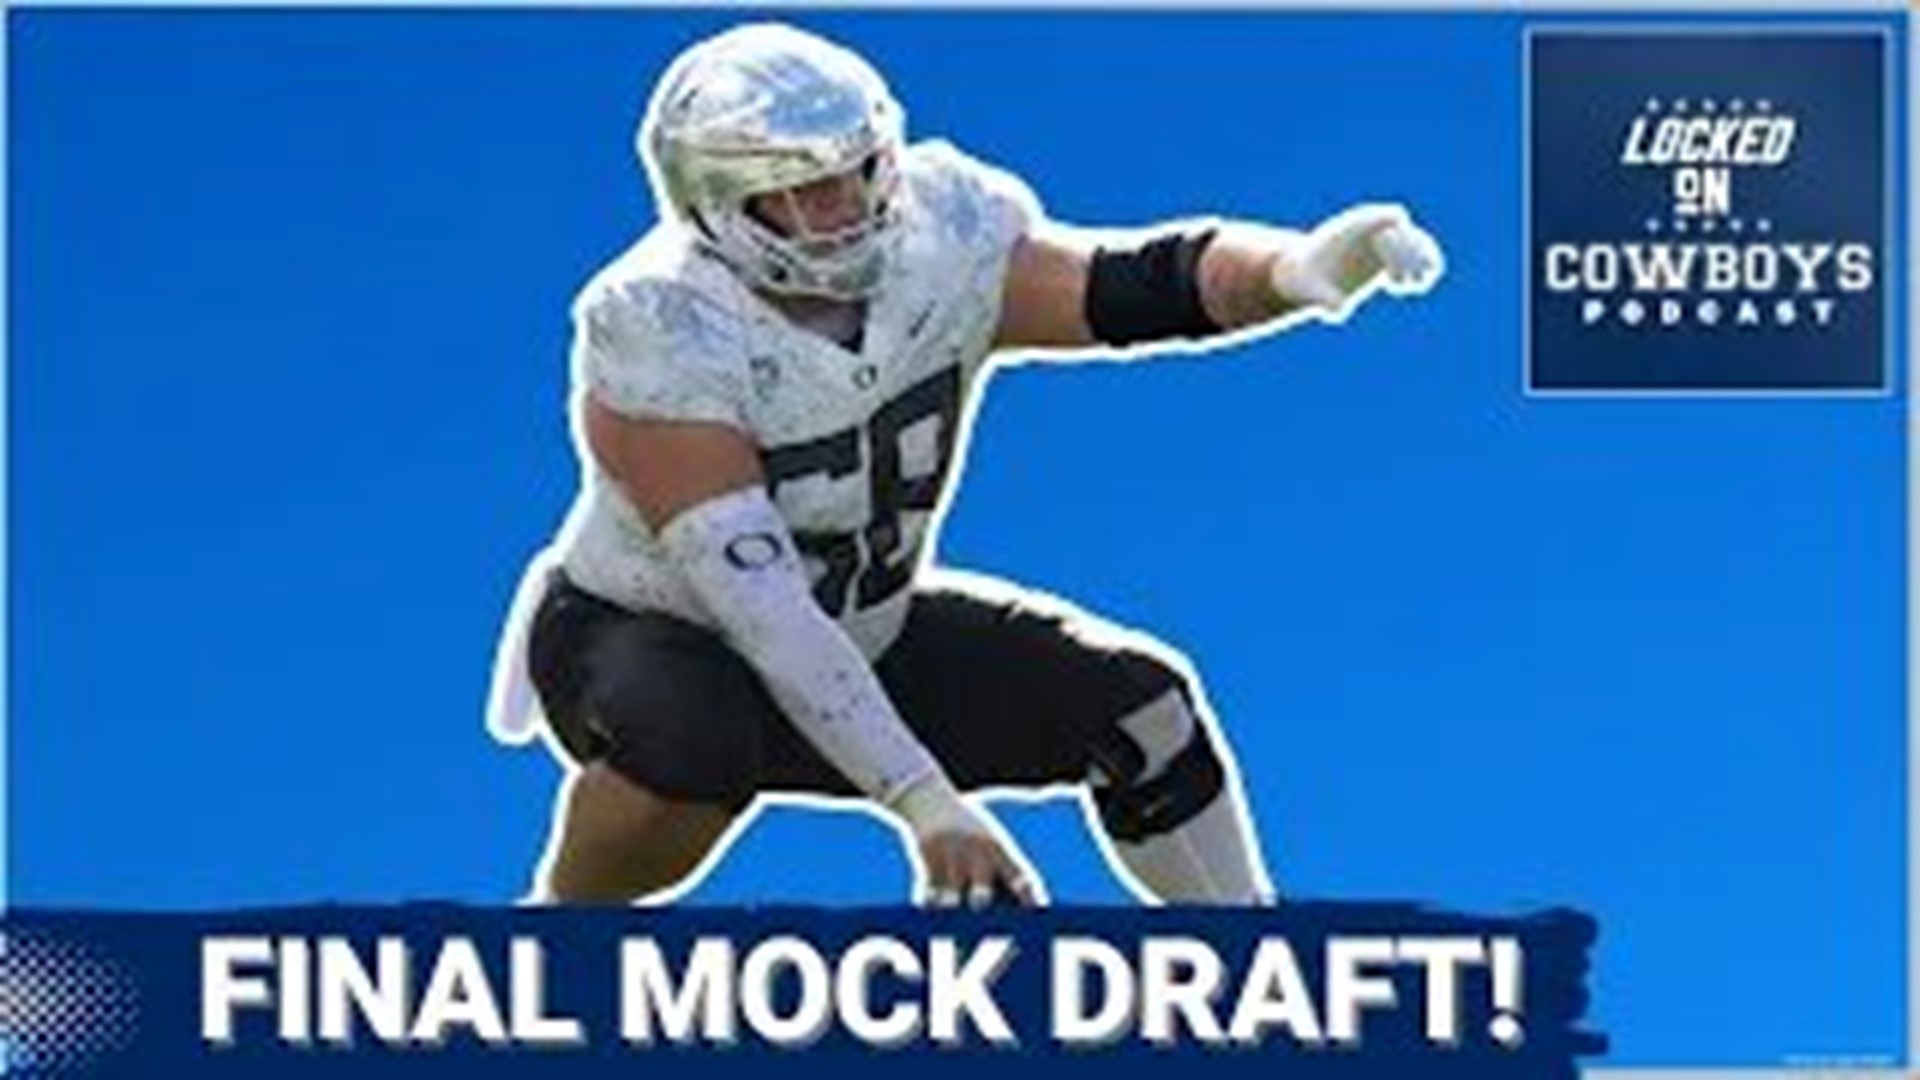 The NFL Draft is less than a week away and the Dallas Cowboys are expected to take an offensive lineman early. But which OL makes the most sense for the Cowboys?